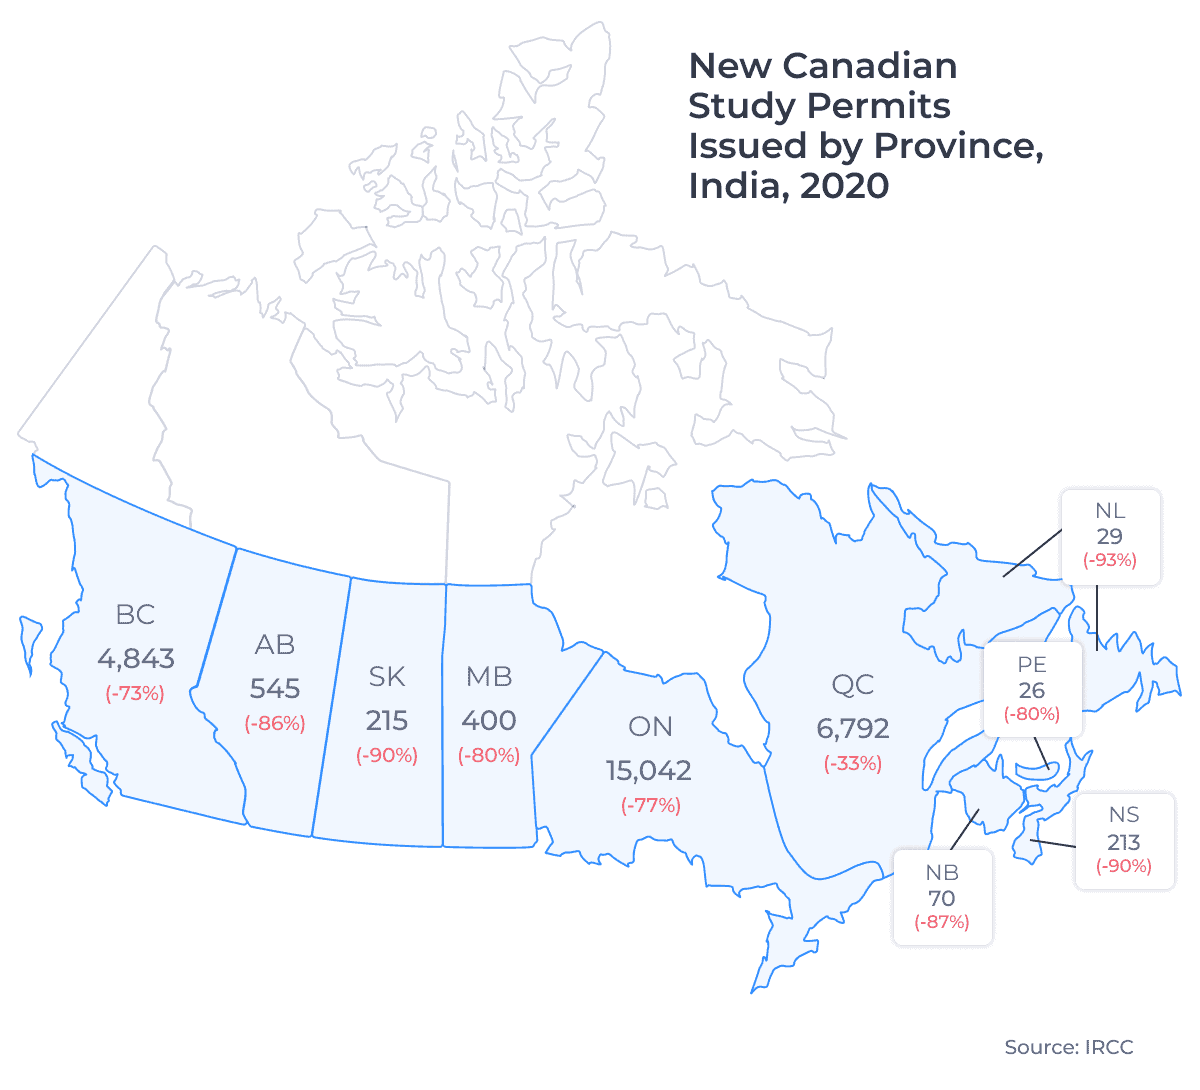 Map of Canada showing the number of new study permits issued to Indian nationals by province in 2020, as well as the percentage change from 2019.